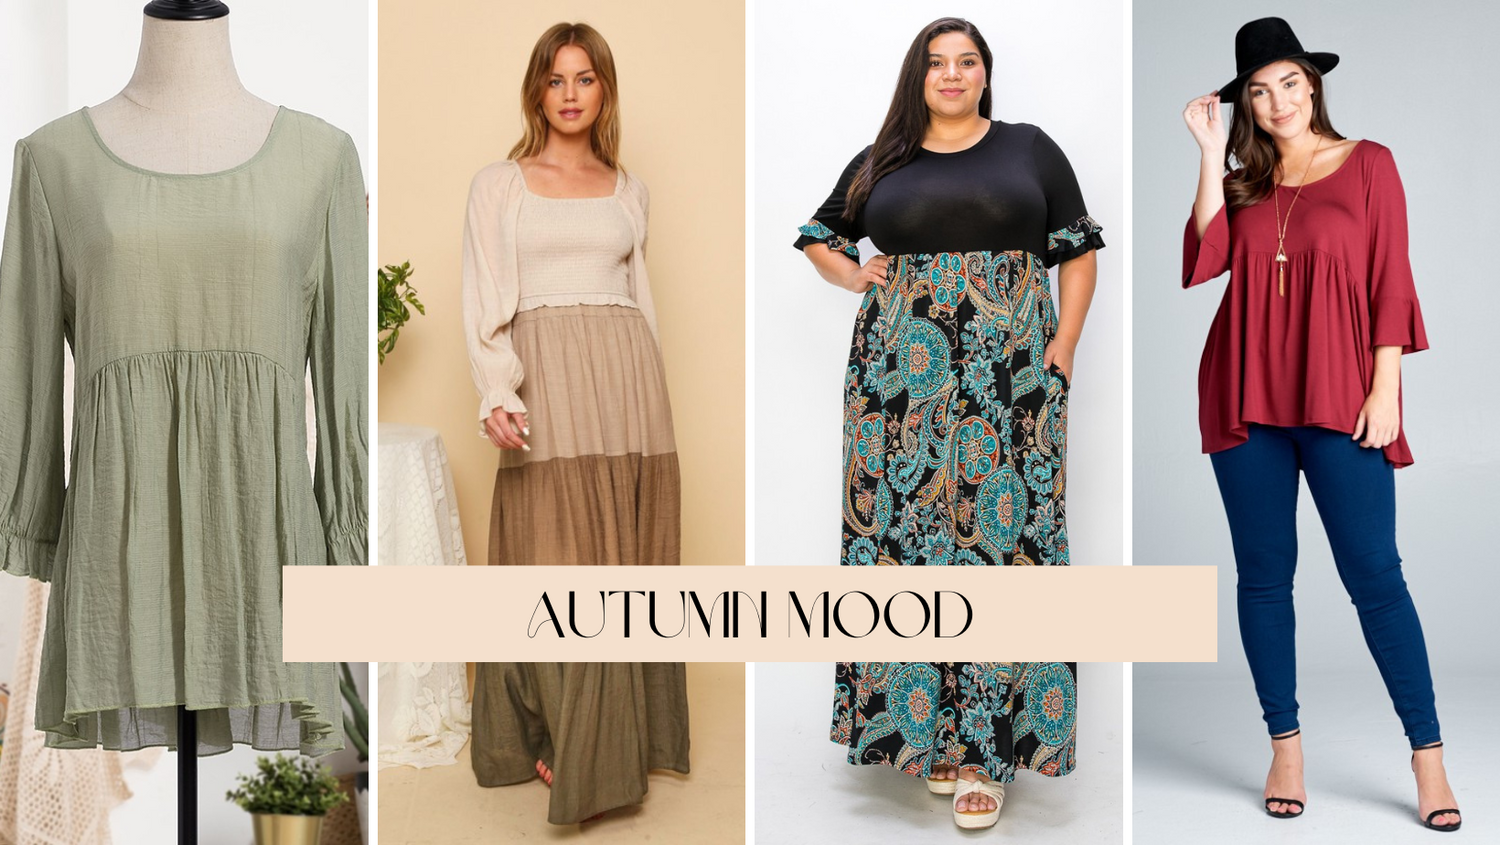 Fall Style Guide For The Curvy Chicas - LatinTRENDS